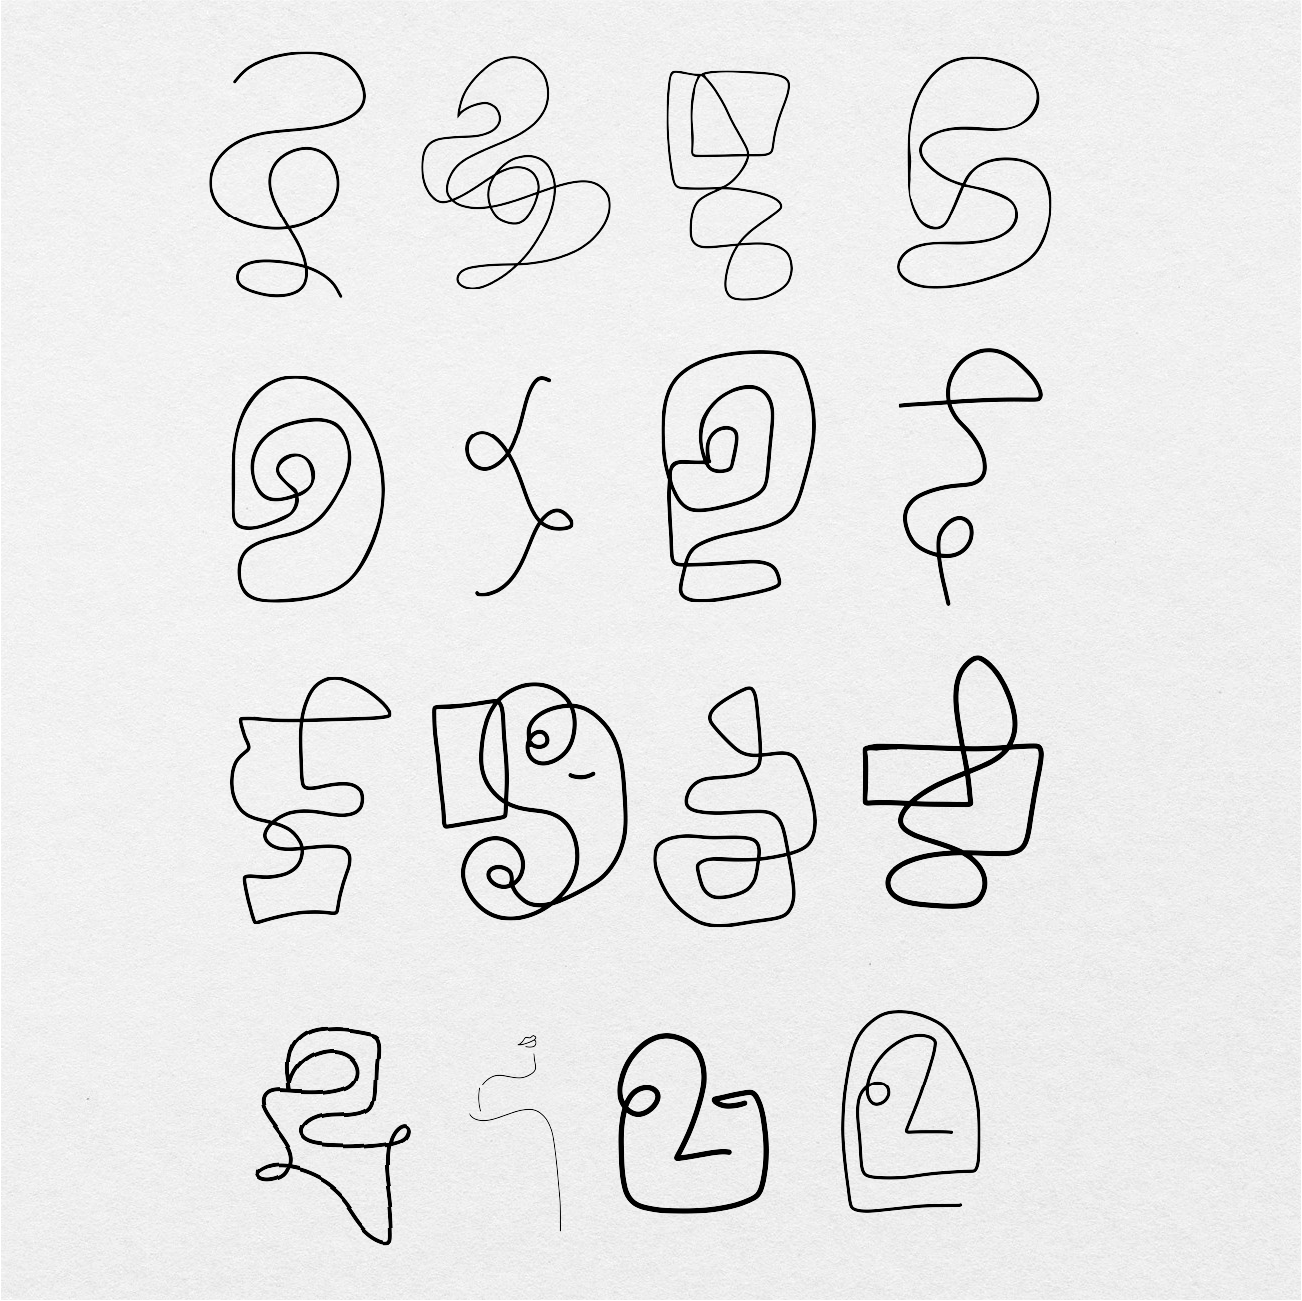 162 Digital Abstract Drawing Sticker Bundle - Stationery Pal